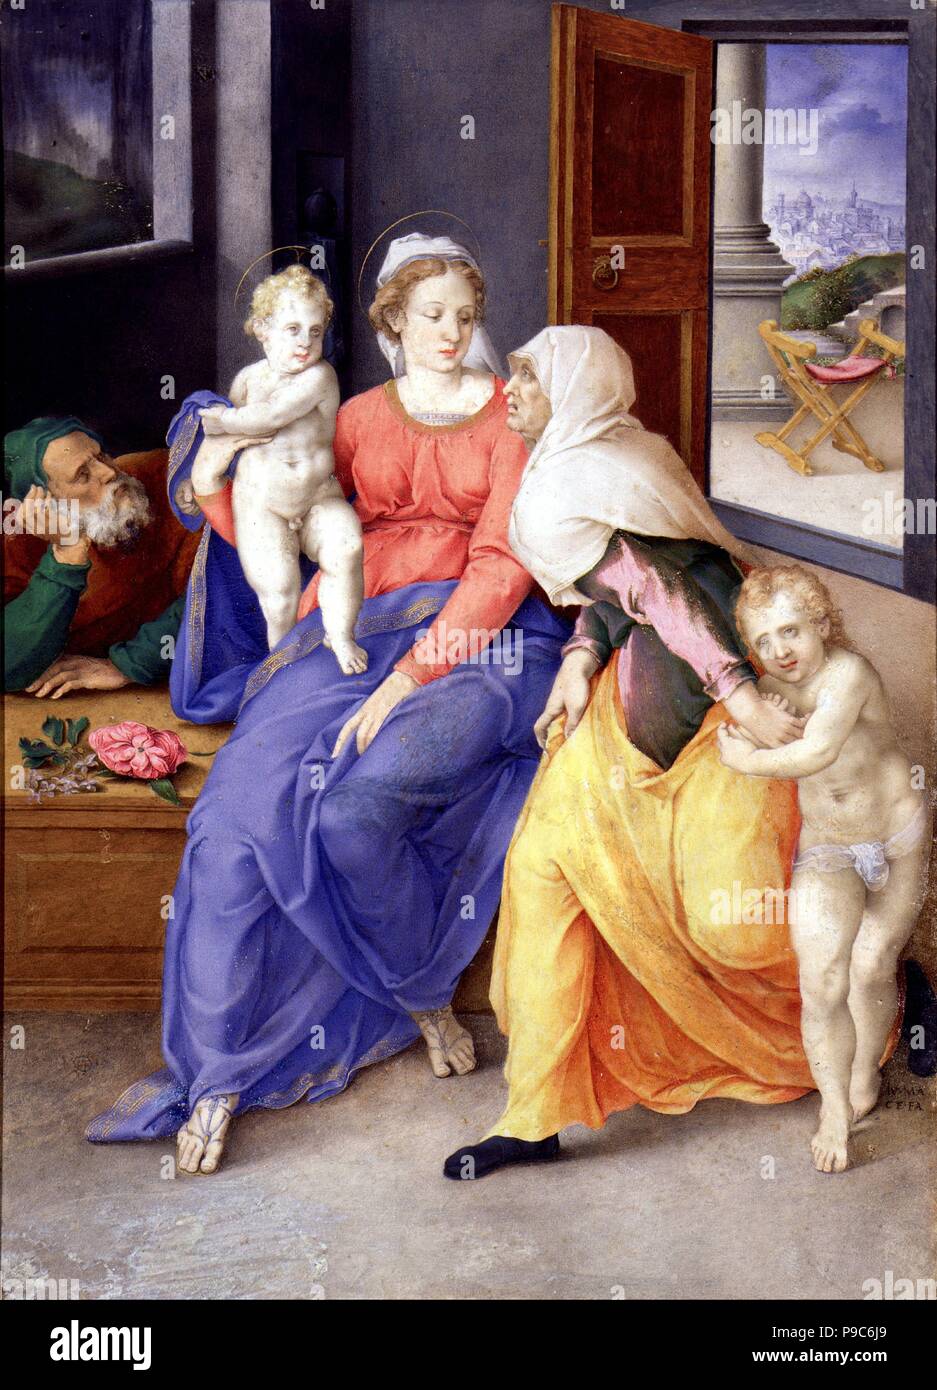 The Holy Family with John the Baptist as a Boy and Saint Elizabeth. Museum: Museo Lázaro Galdiano, Madrid. Stock Photo